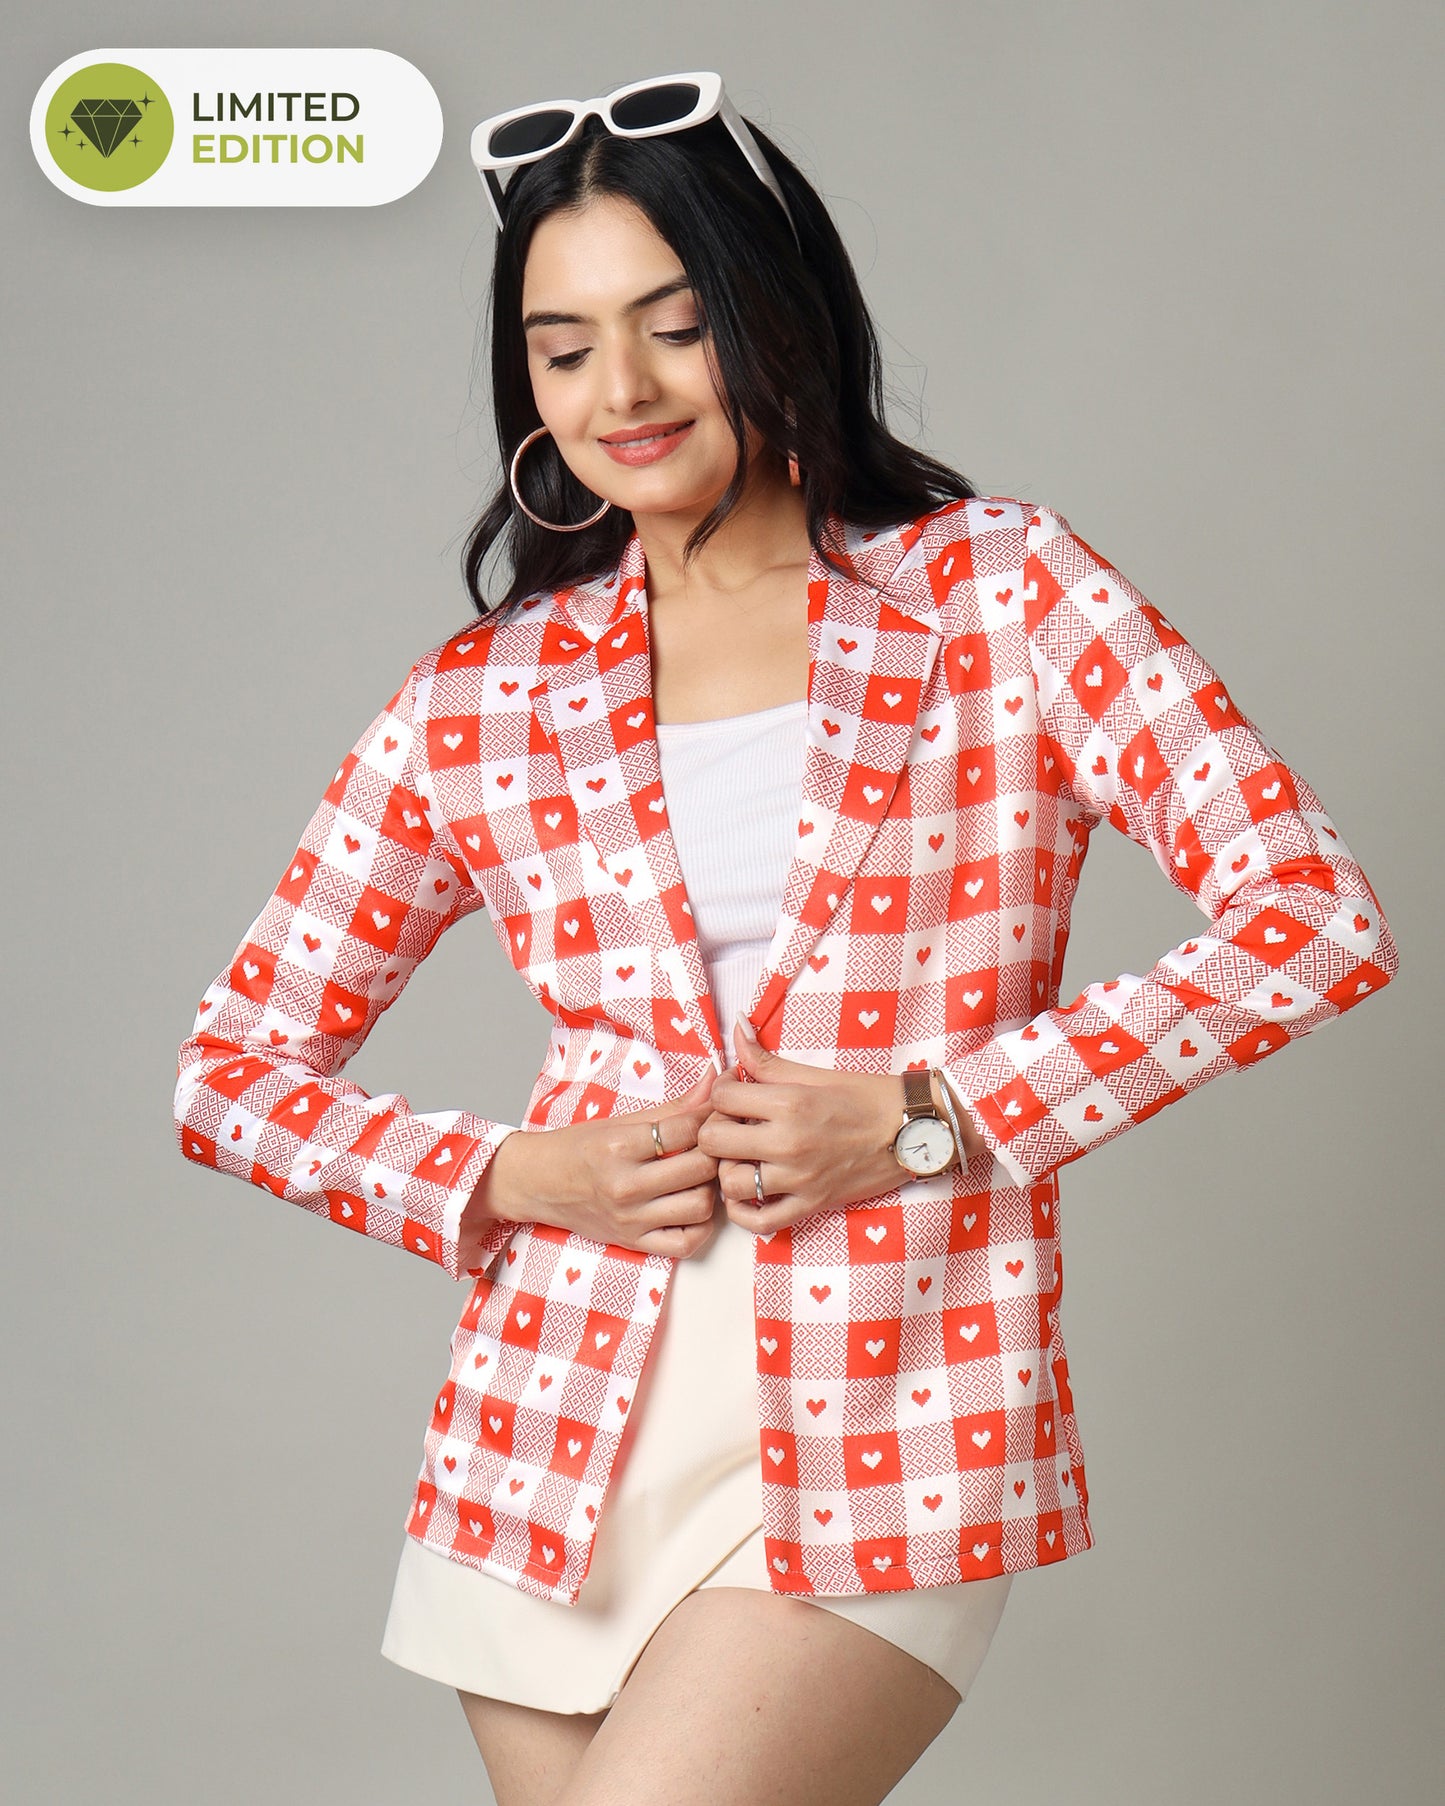 Women's Jacket with a Heart-Fueled Twist